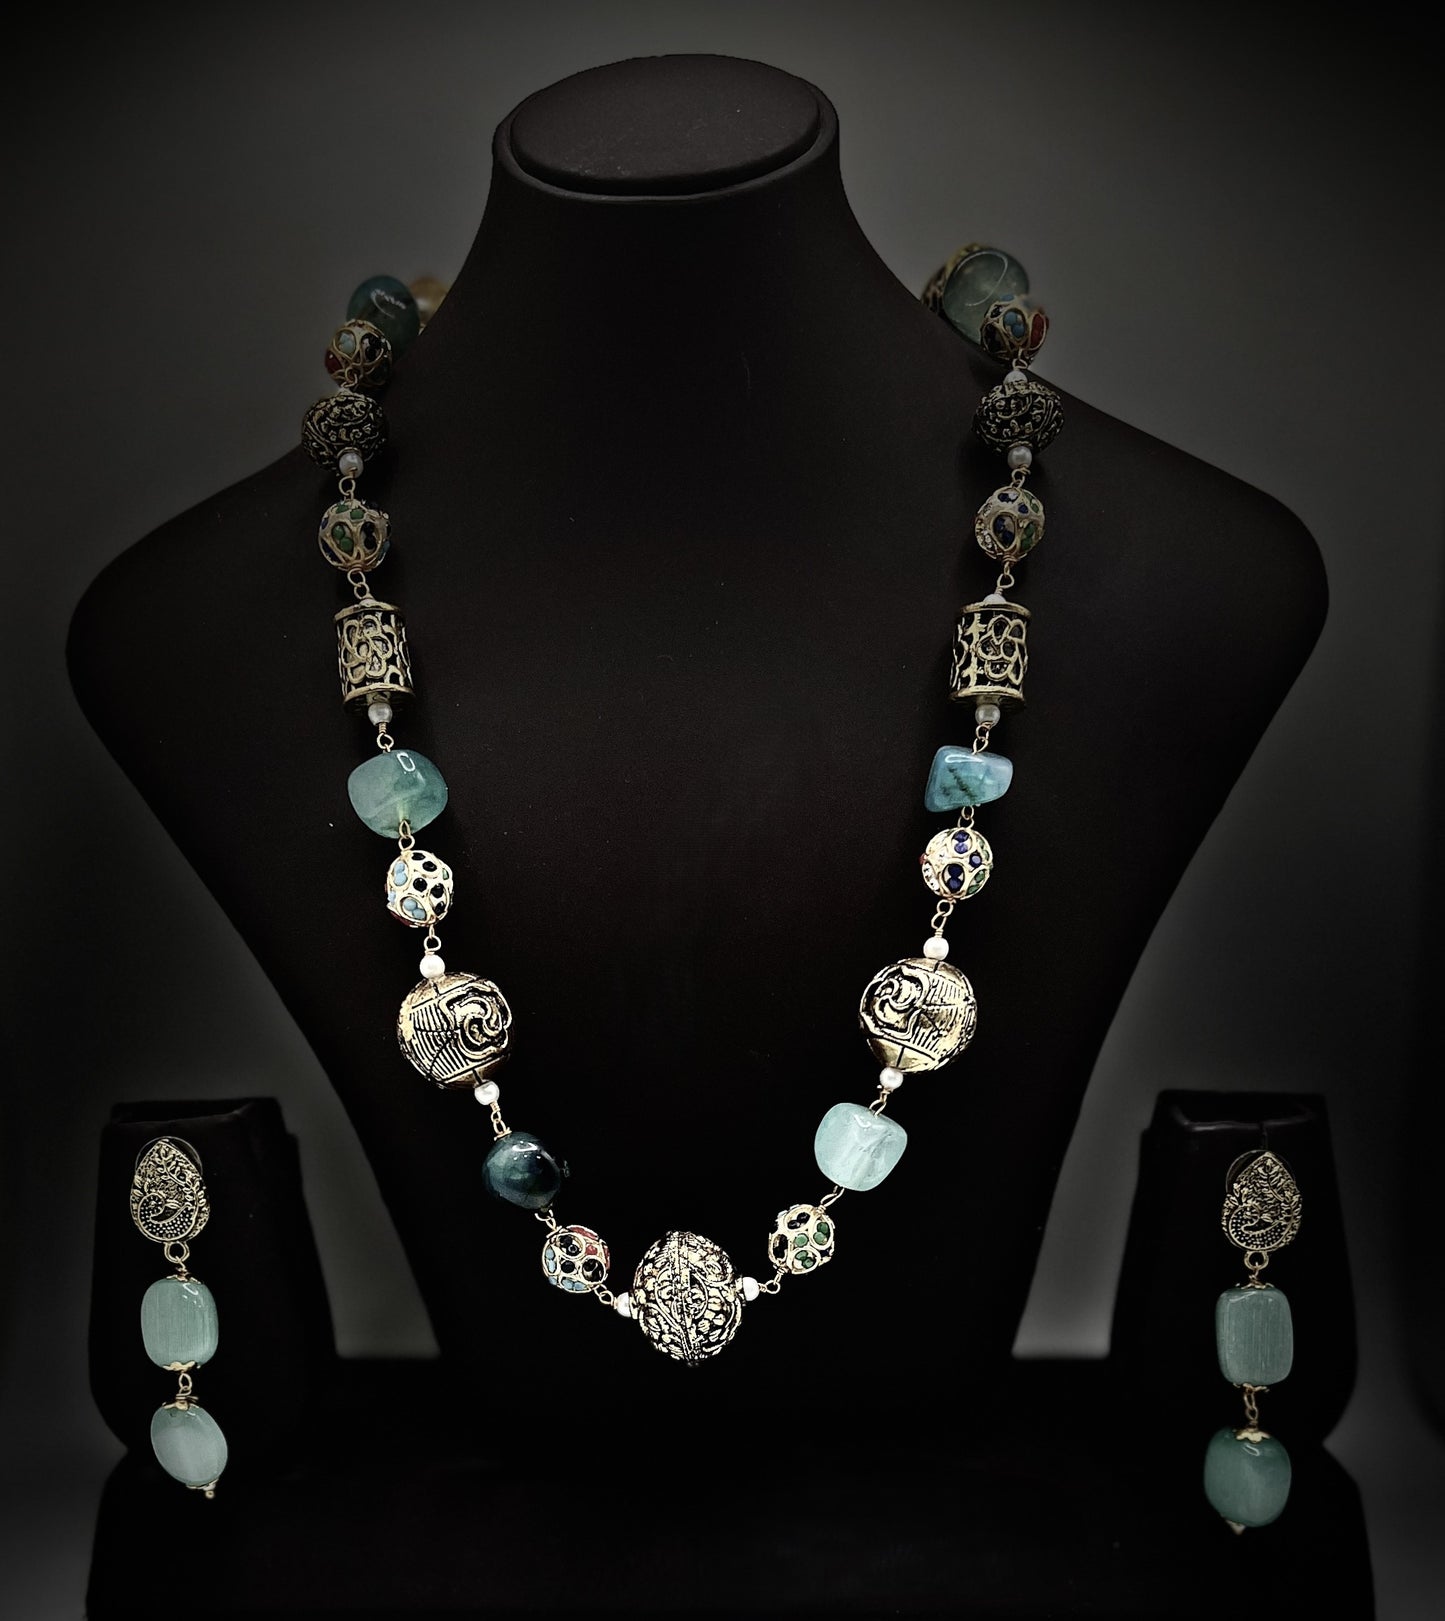 Turquoise Tapestry: Artisanal Beaded Necklace and Earrings Set